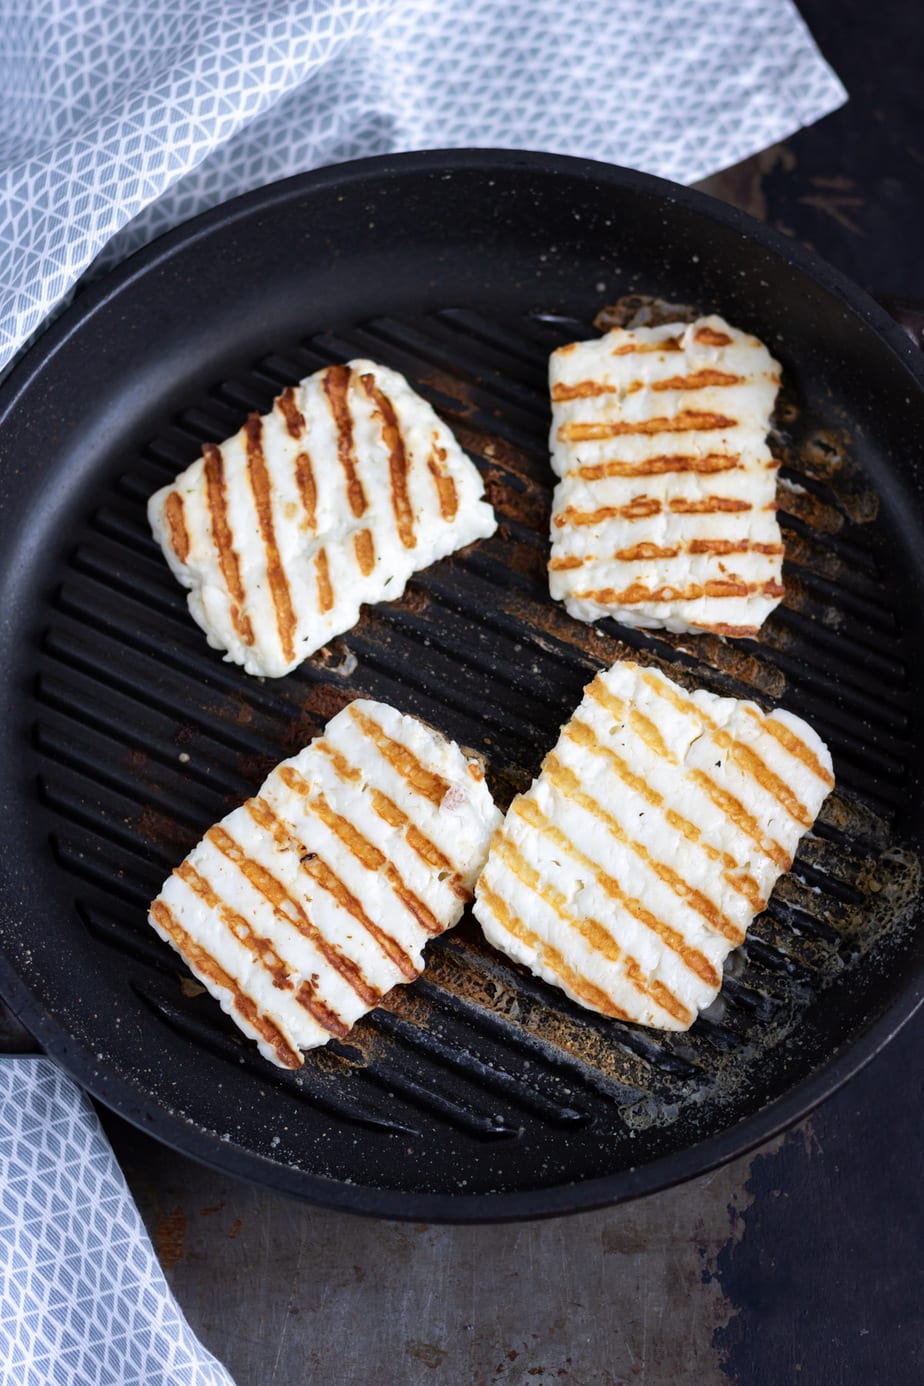 Halloumi grilled in a pan.